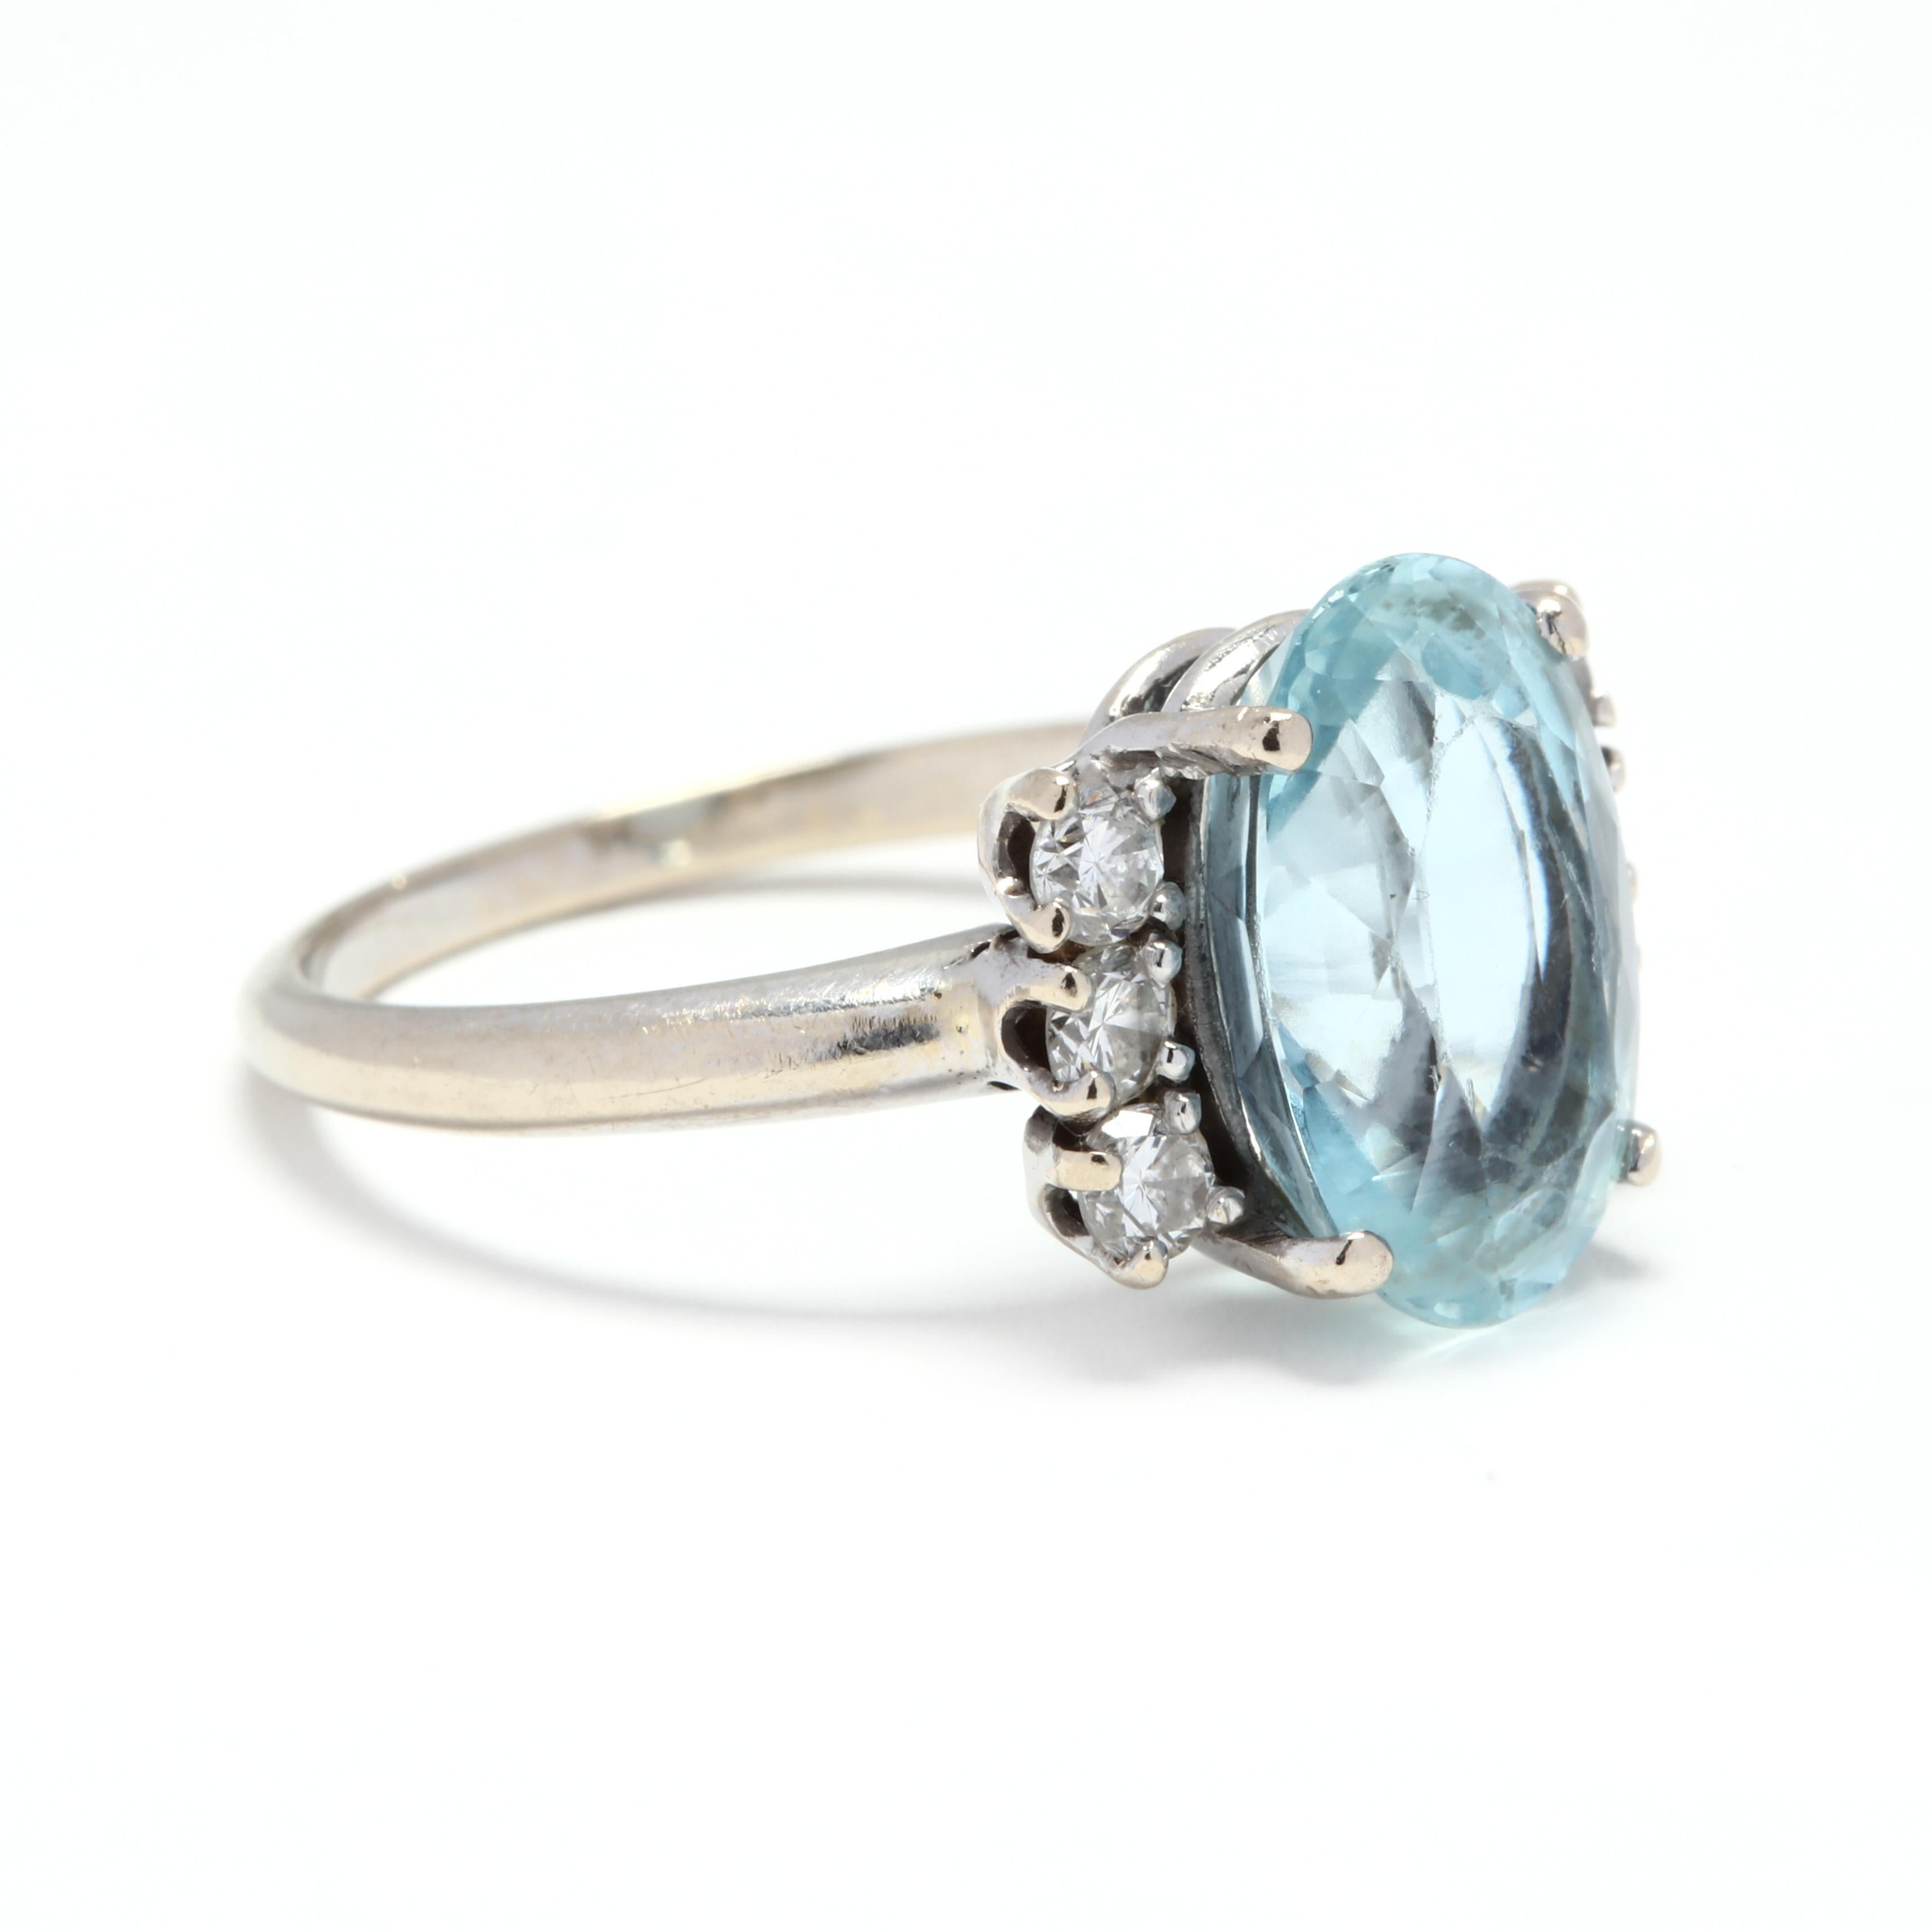 A 14 karat white gold, aquamarine and diamond cocktail ring. This ring features a prong set, oval cut aquamarine center stone weighing approximately 3.65 carats with three full cut round diamonds on either side weighing approximately .36 total